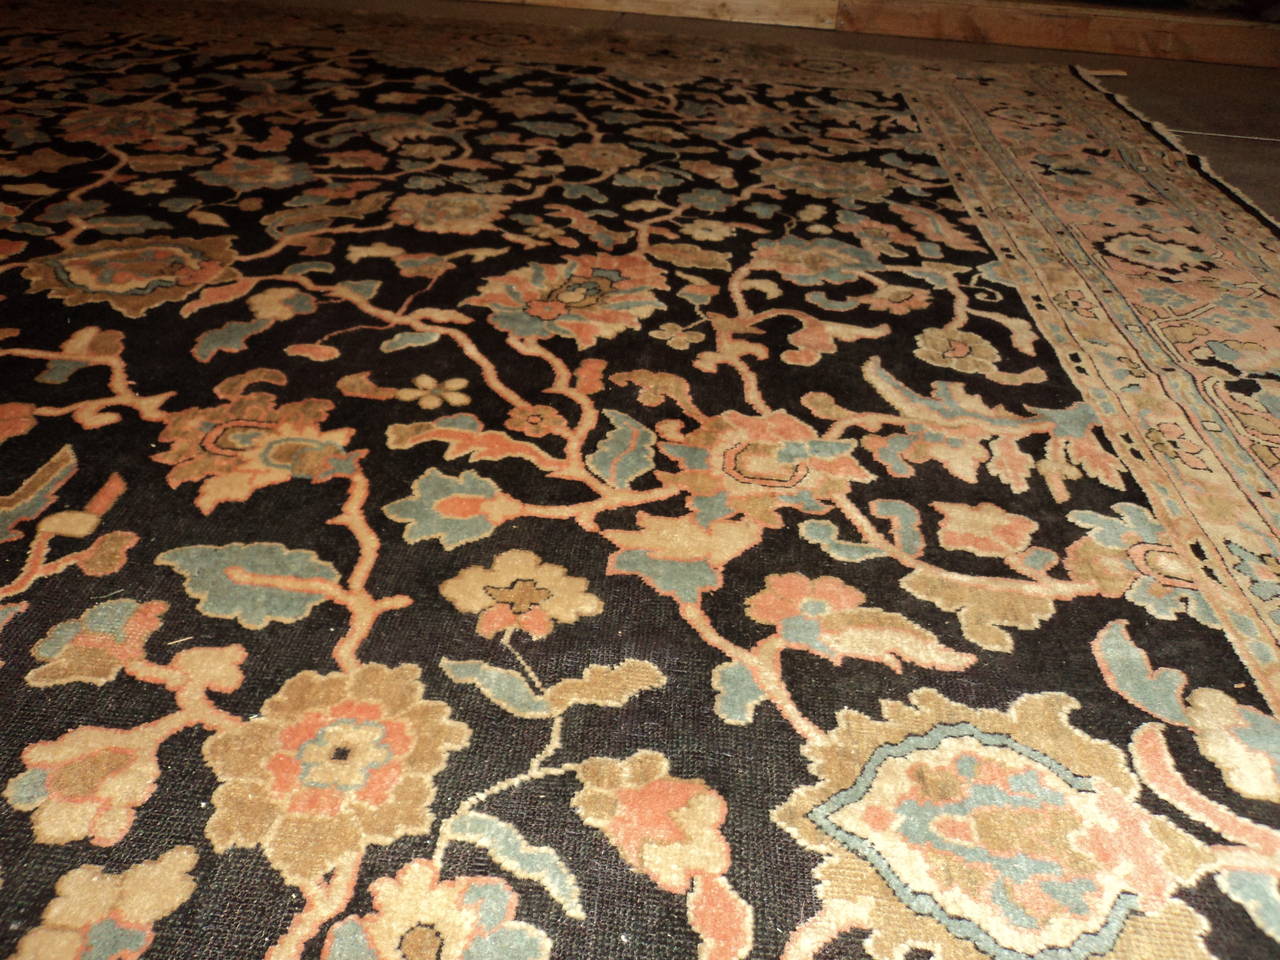 This third-quarter of the 19th-century Agra from India Oriental Rug measures 11’1” x 15’3”. It has a black background with a vine and tendril design in coral, very pale sky blue, ivory and mocha brown.  The vine and flower motif is quite large and